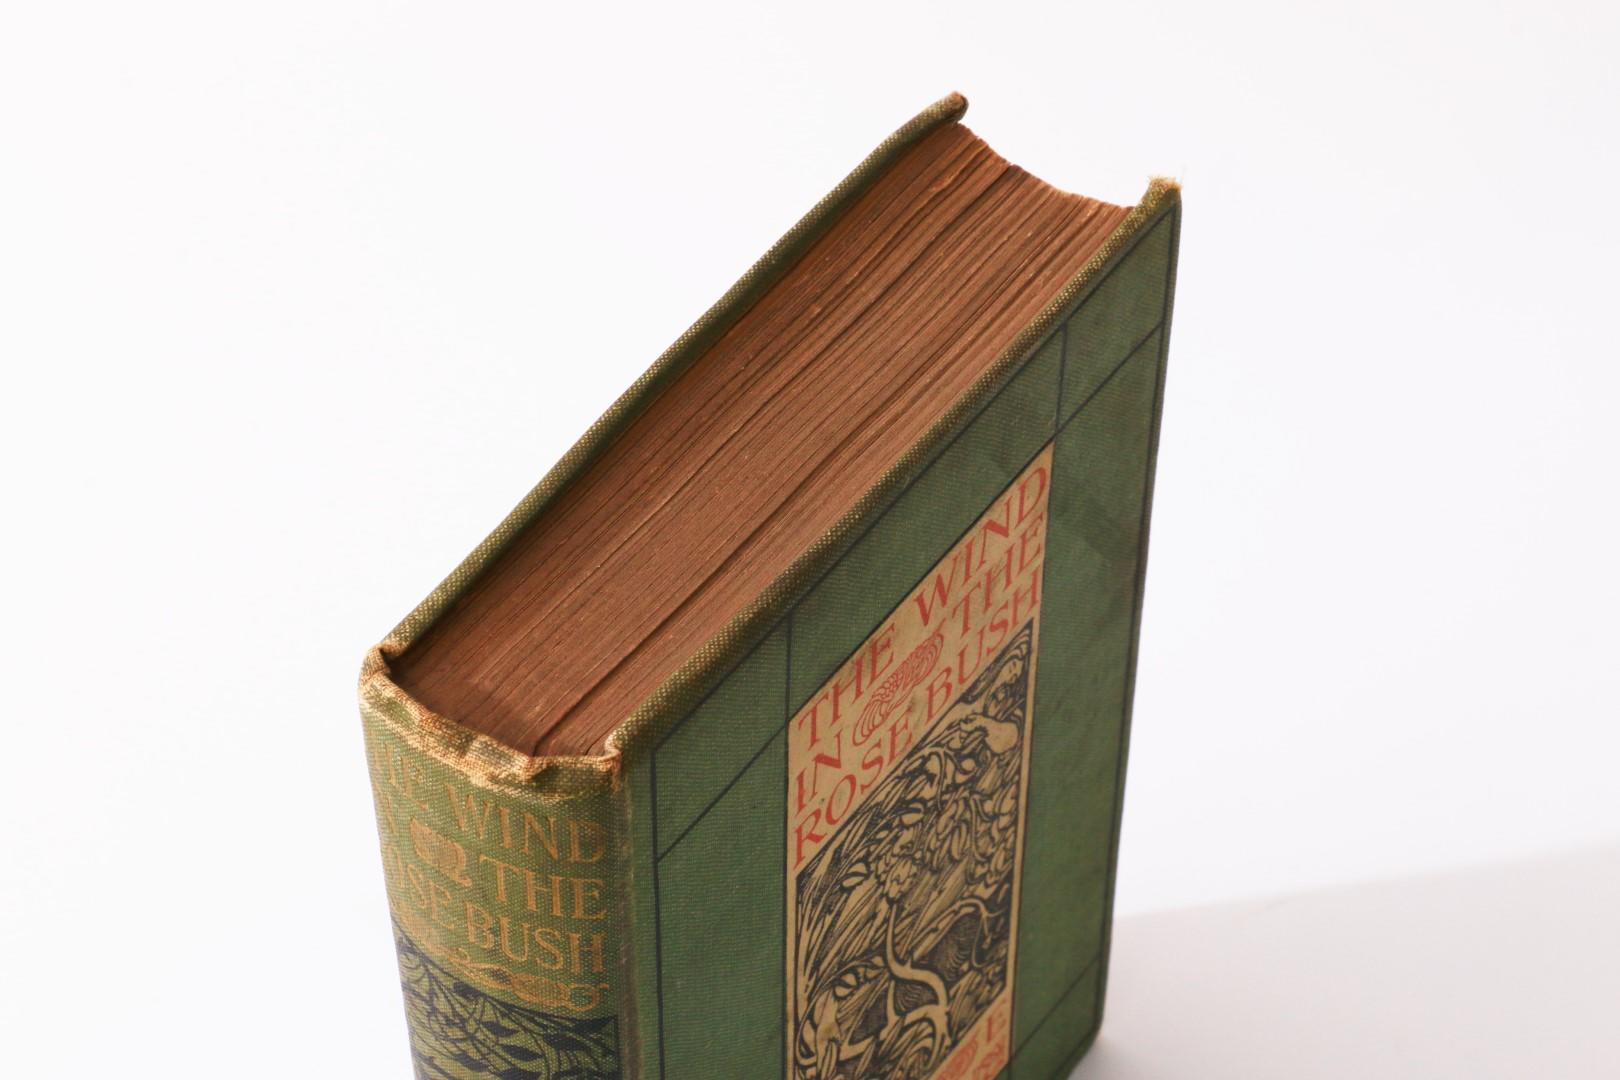 Mary E. Wilkins - The Wind in the Rose Bush - John Murray, 1903, First Edition.